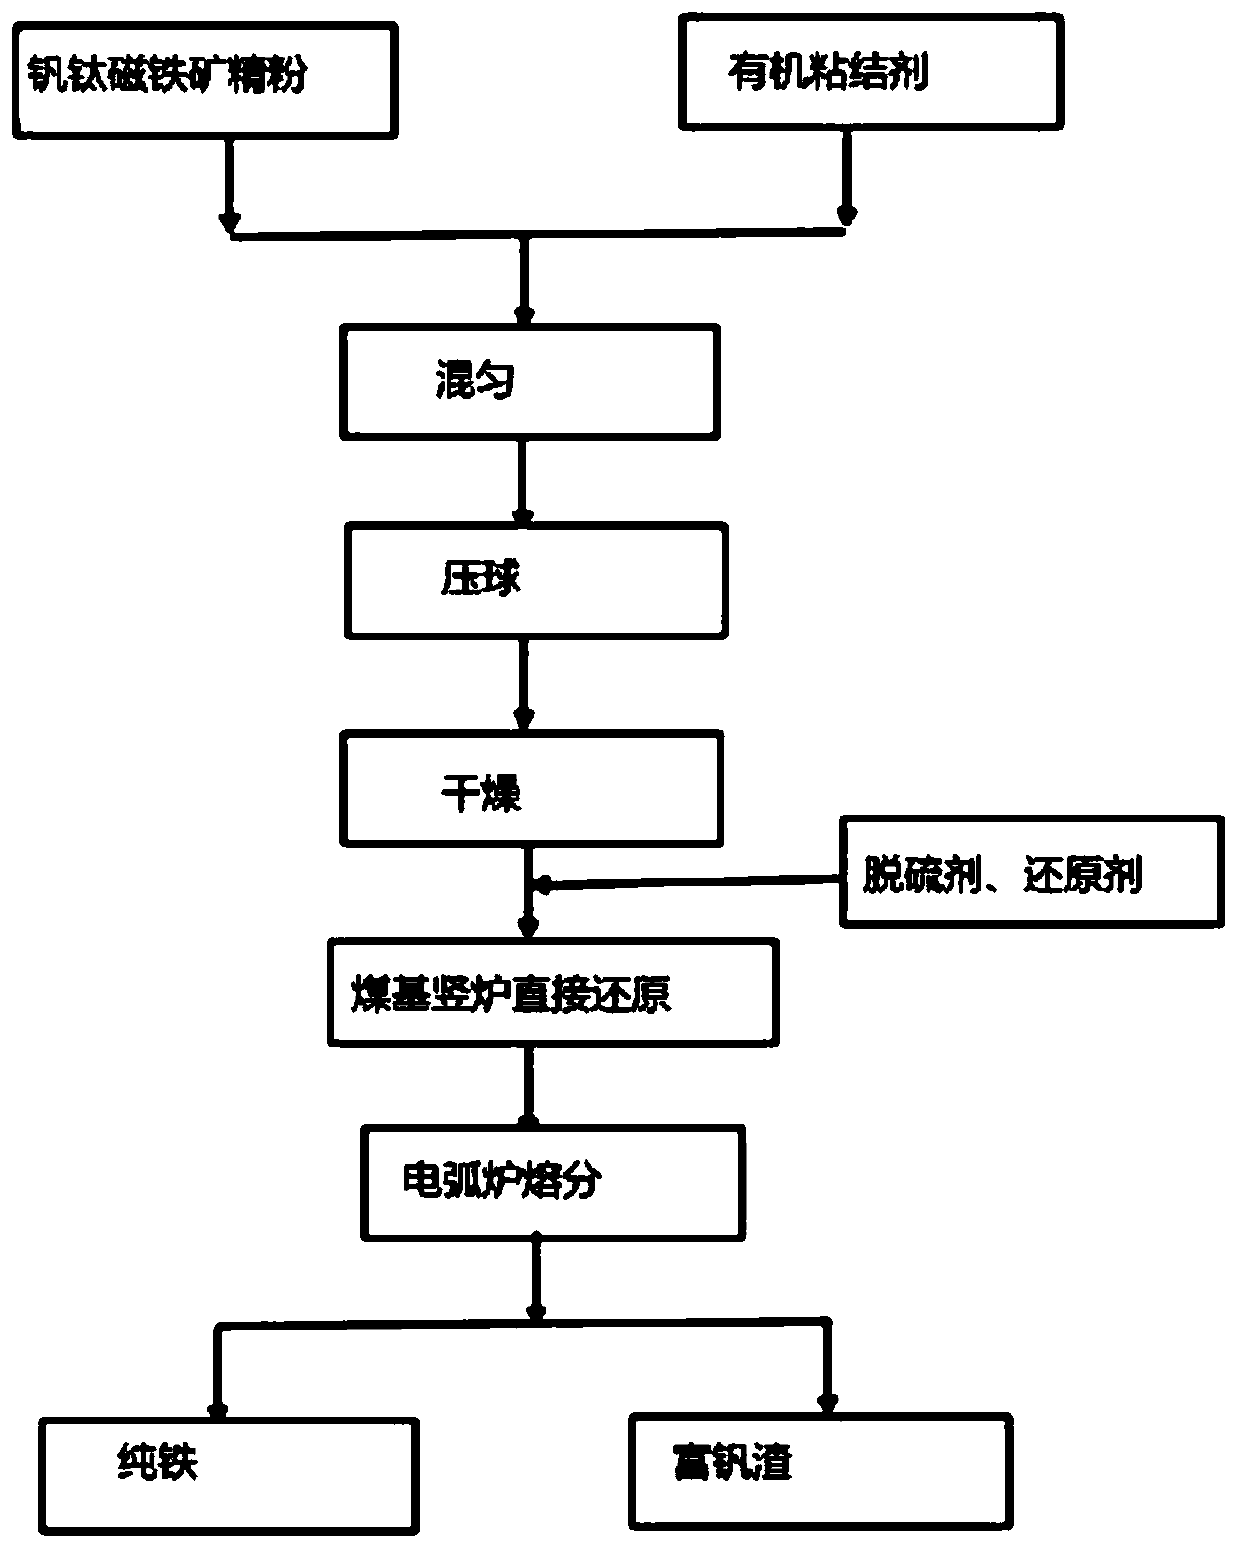 Method for separating and enriching vanadium from iron concentrate and producing pure iron